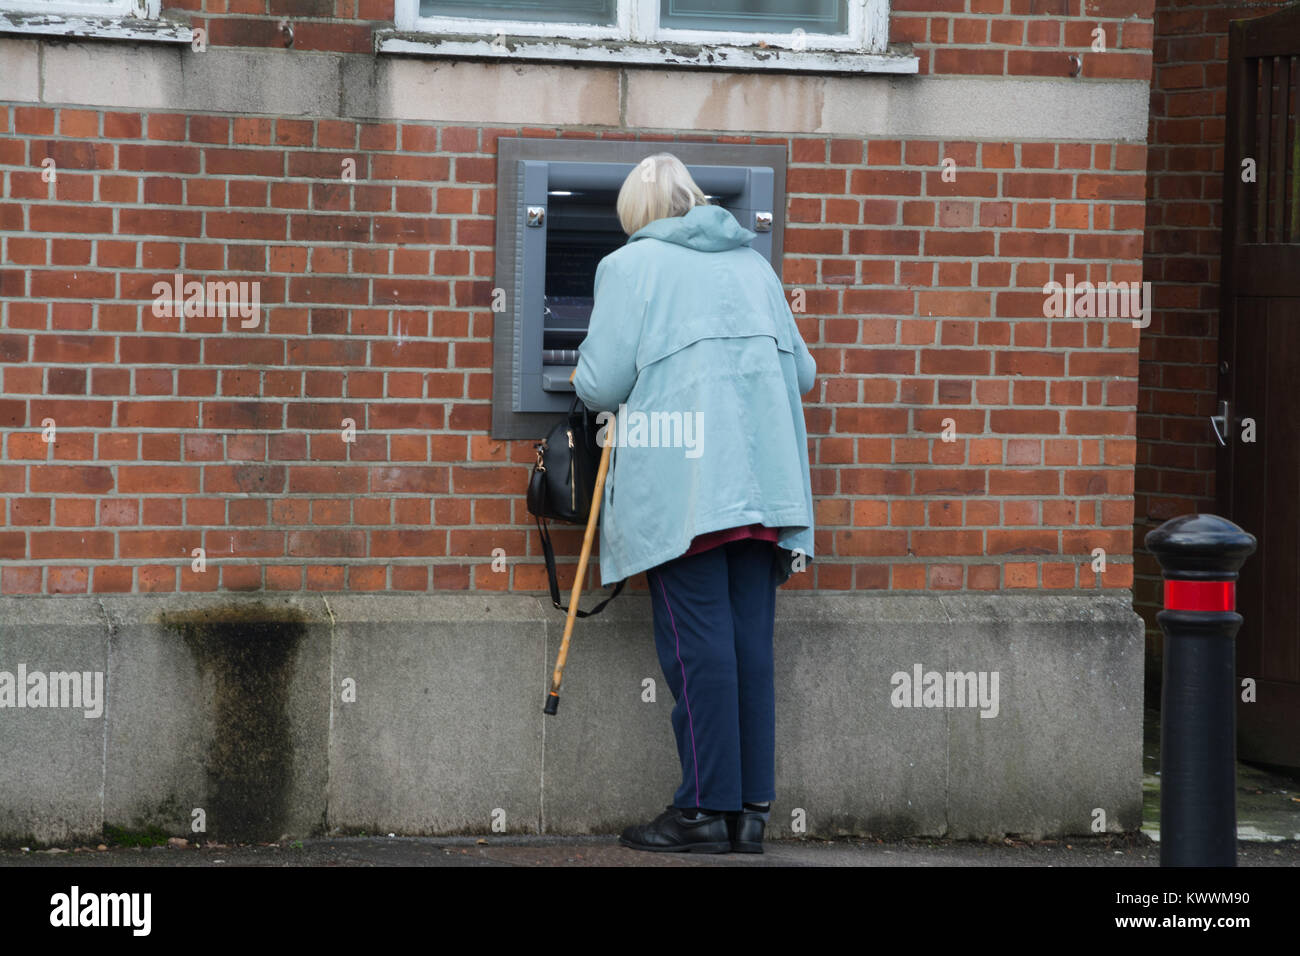 Elderly woman with a walking stick using an outdoor automatic teller machine (ATM, cash machine) at a bank Stock Photo